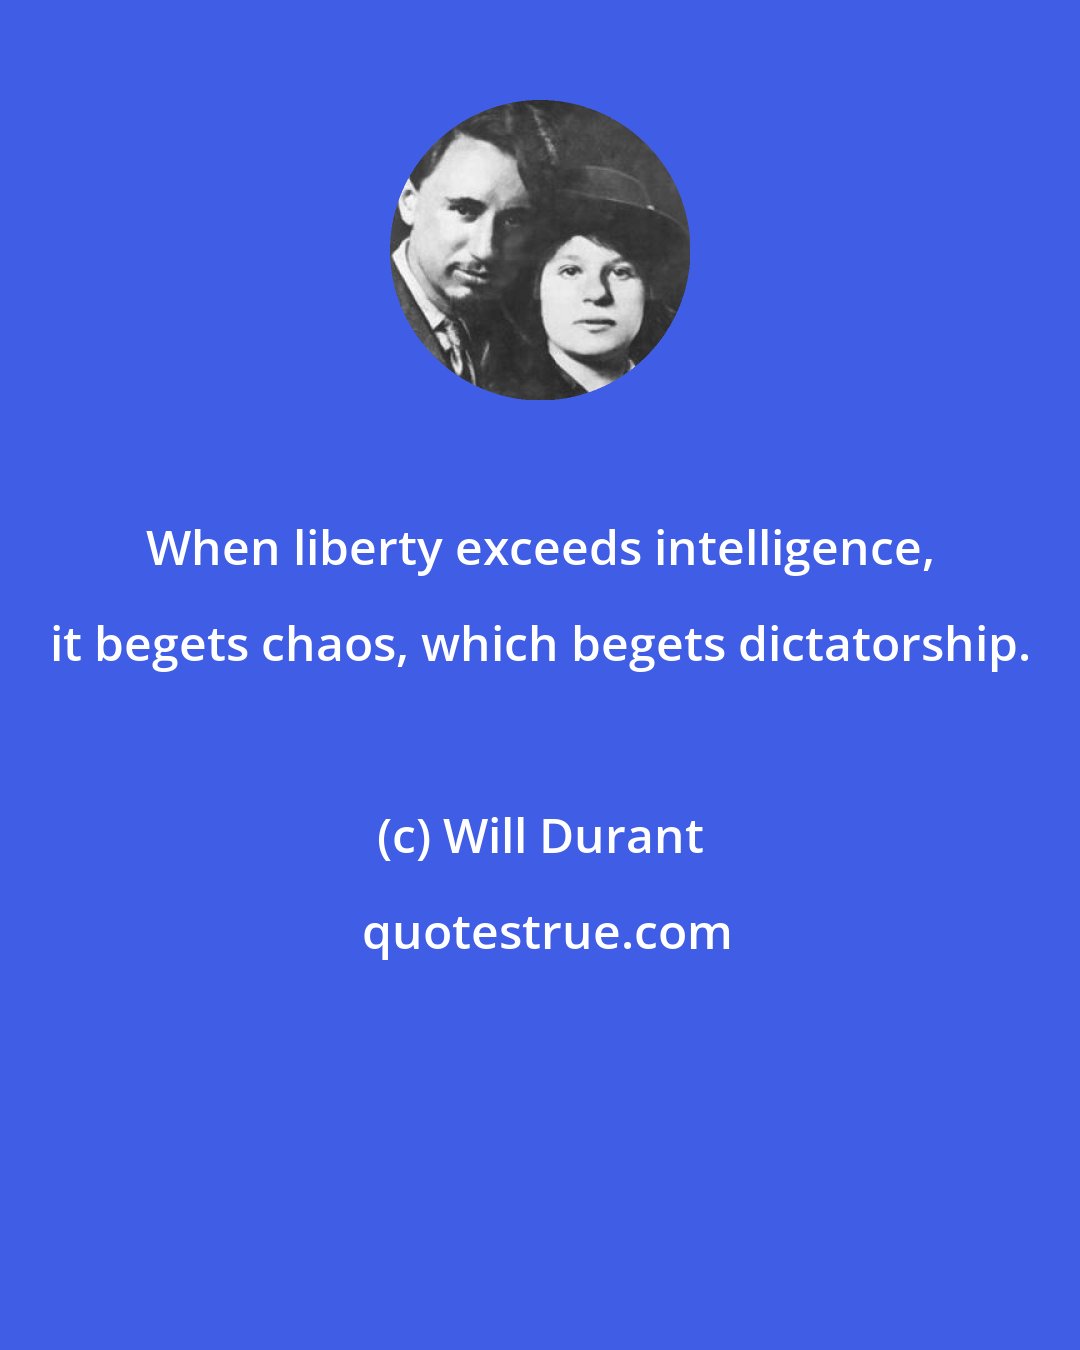 Will Durant: When liberty exceeds intelligence, it begets chaos, which begets dictatorship.